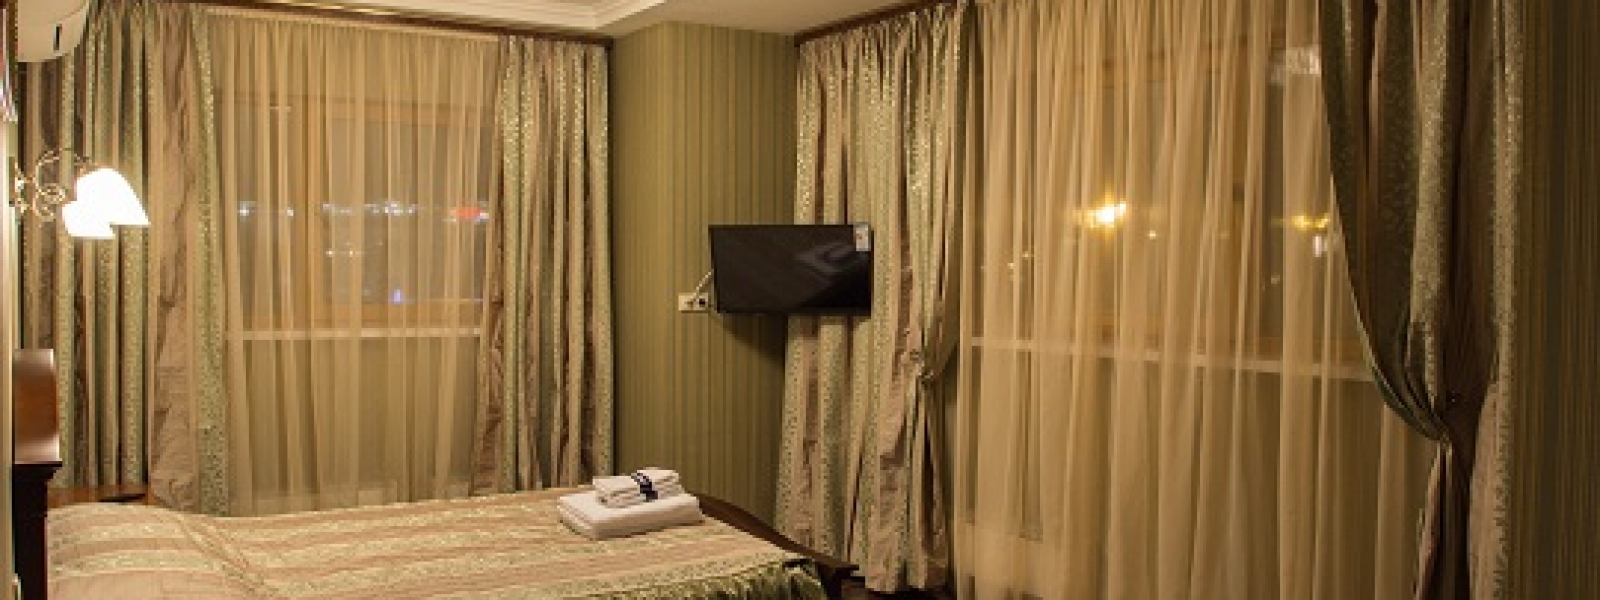 The most comfortable rooms are waiting for you!